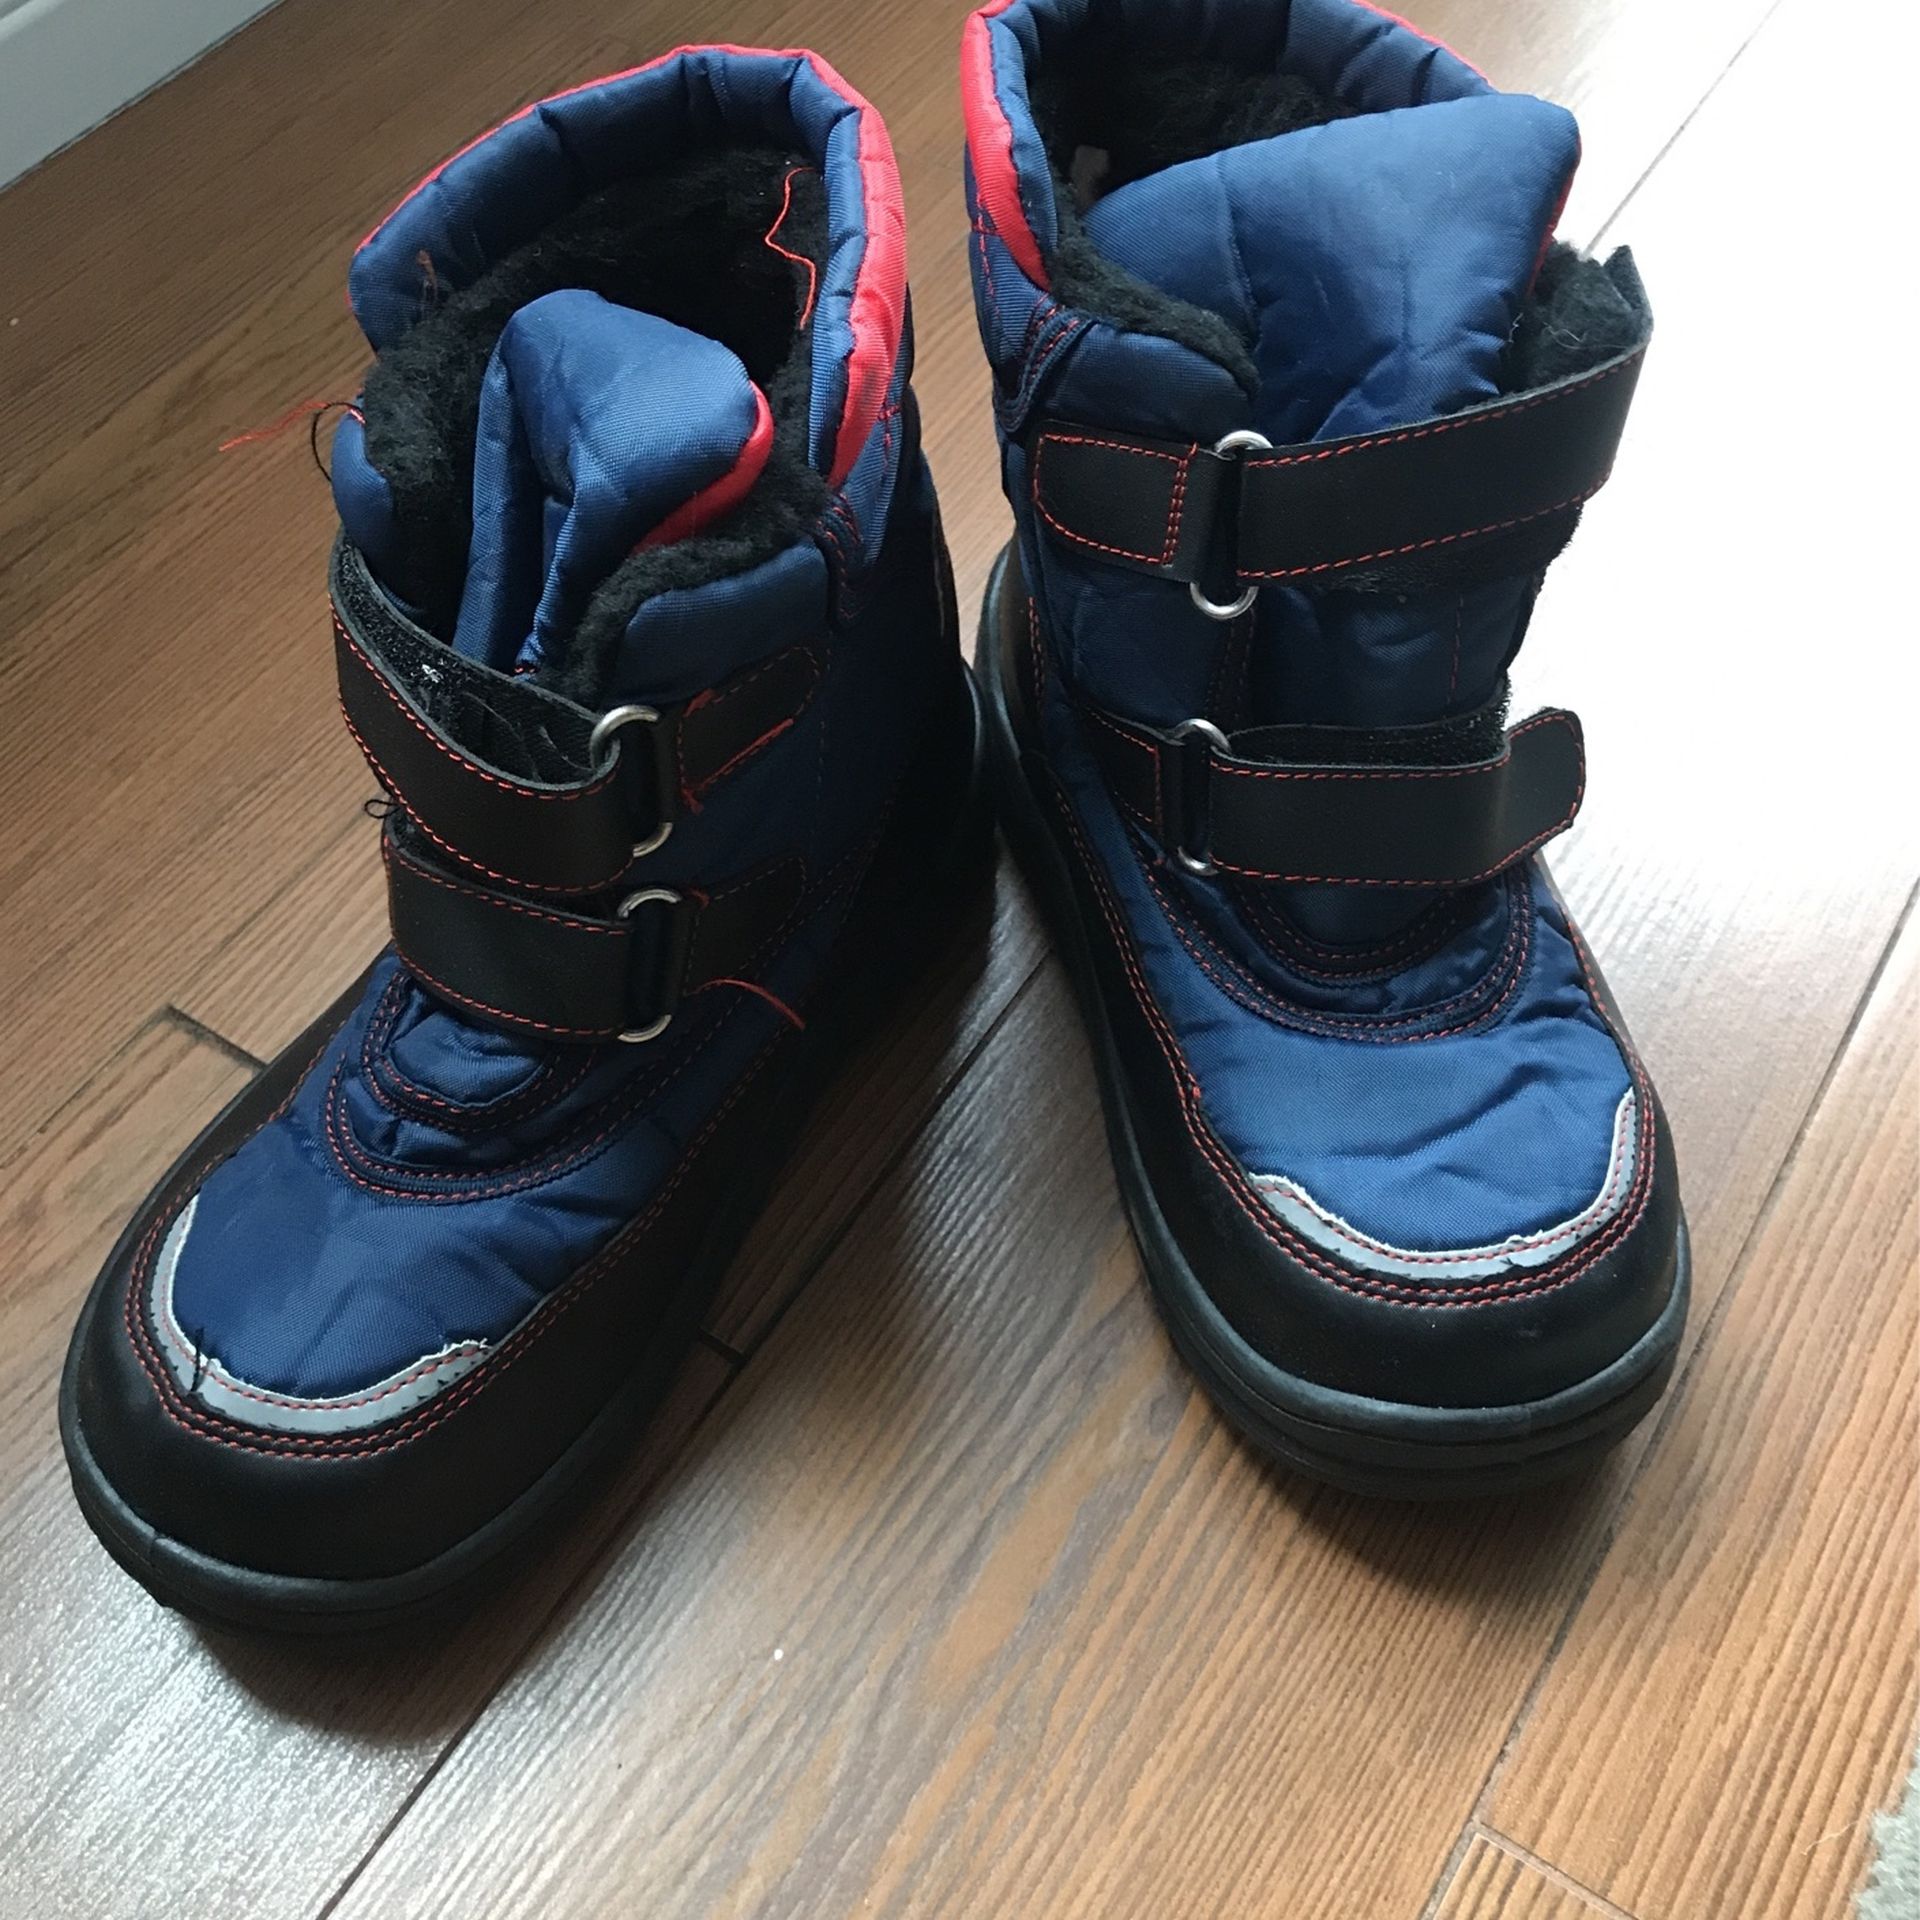 Kids Or Boys Snow Boots Size 3